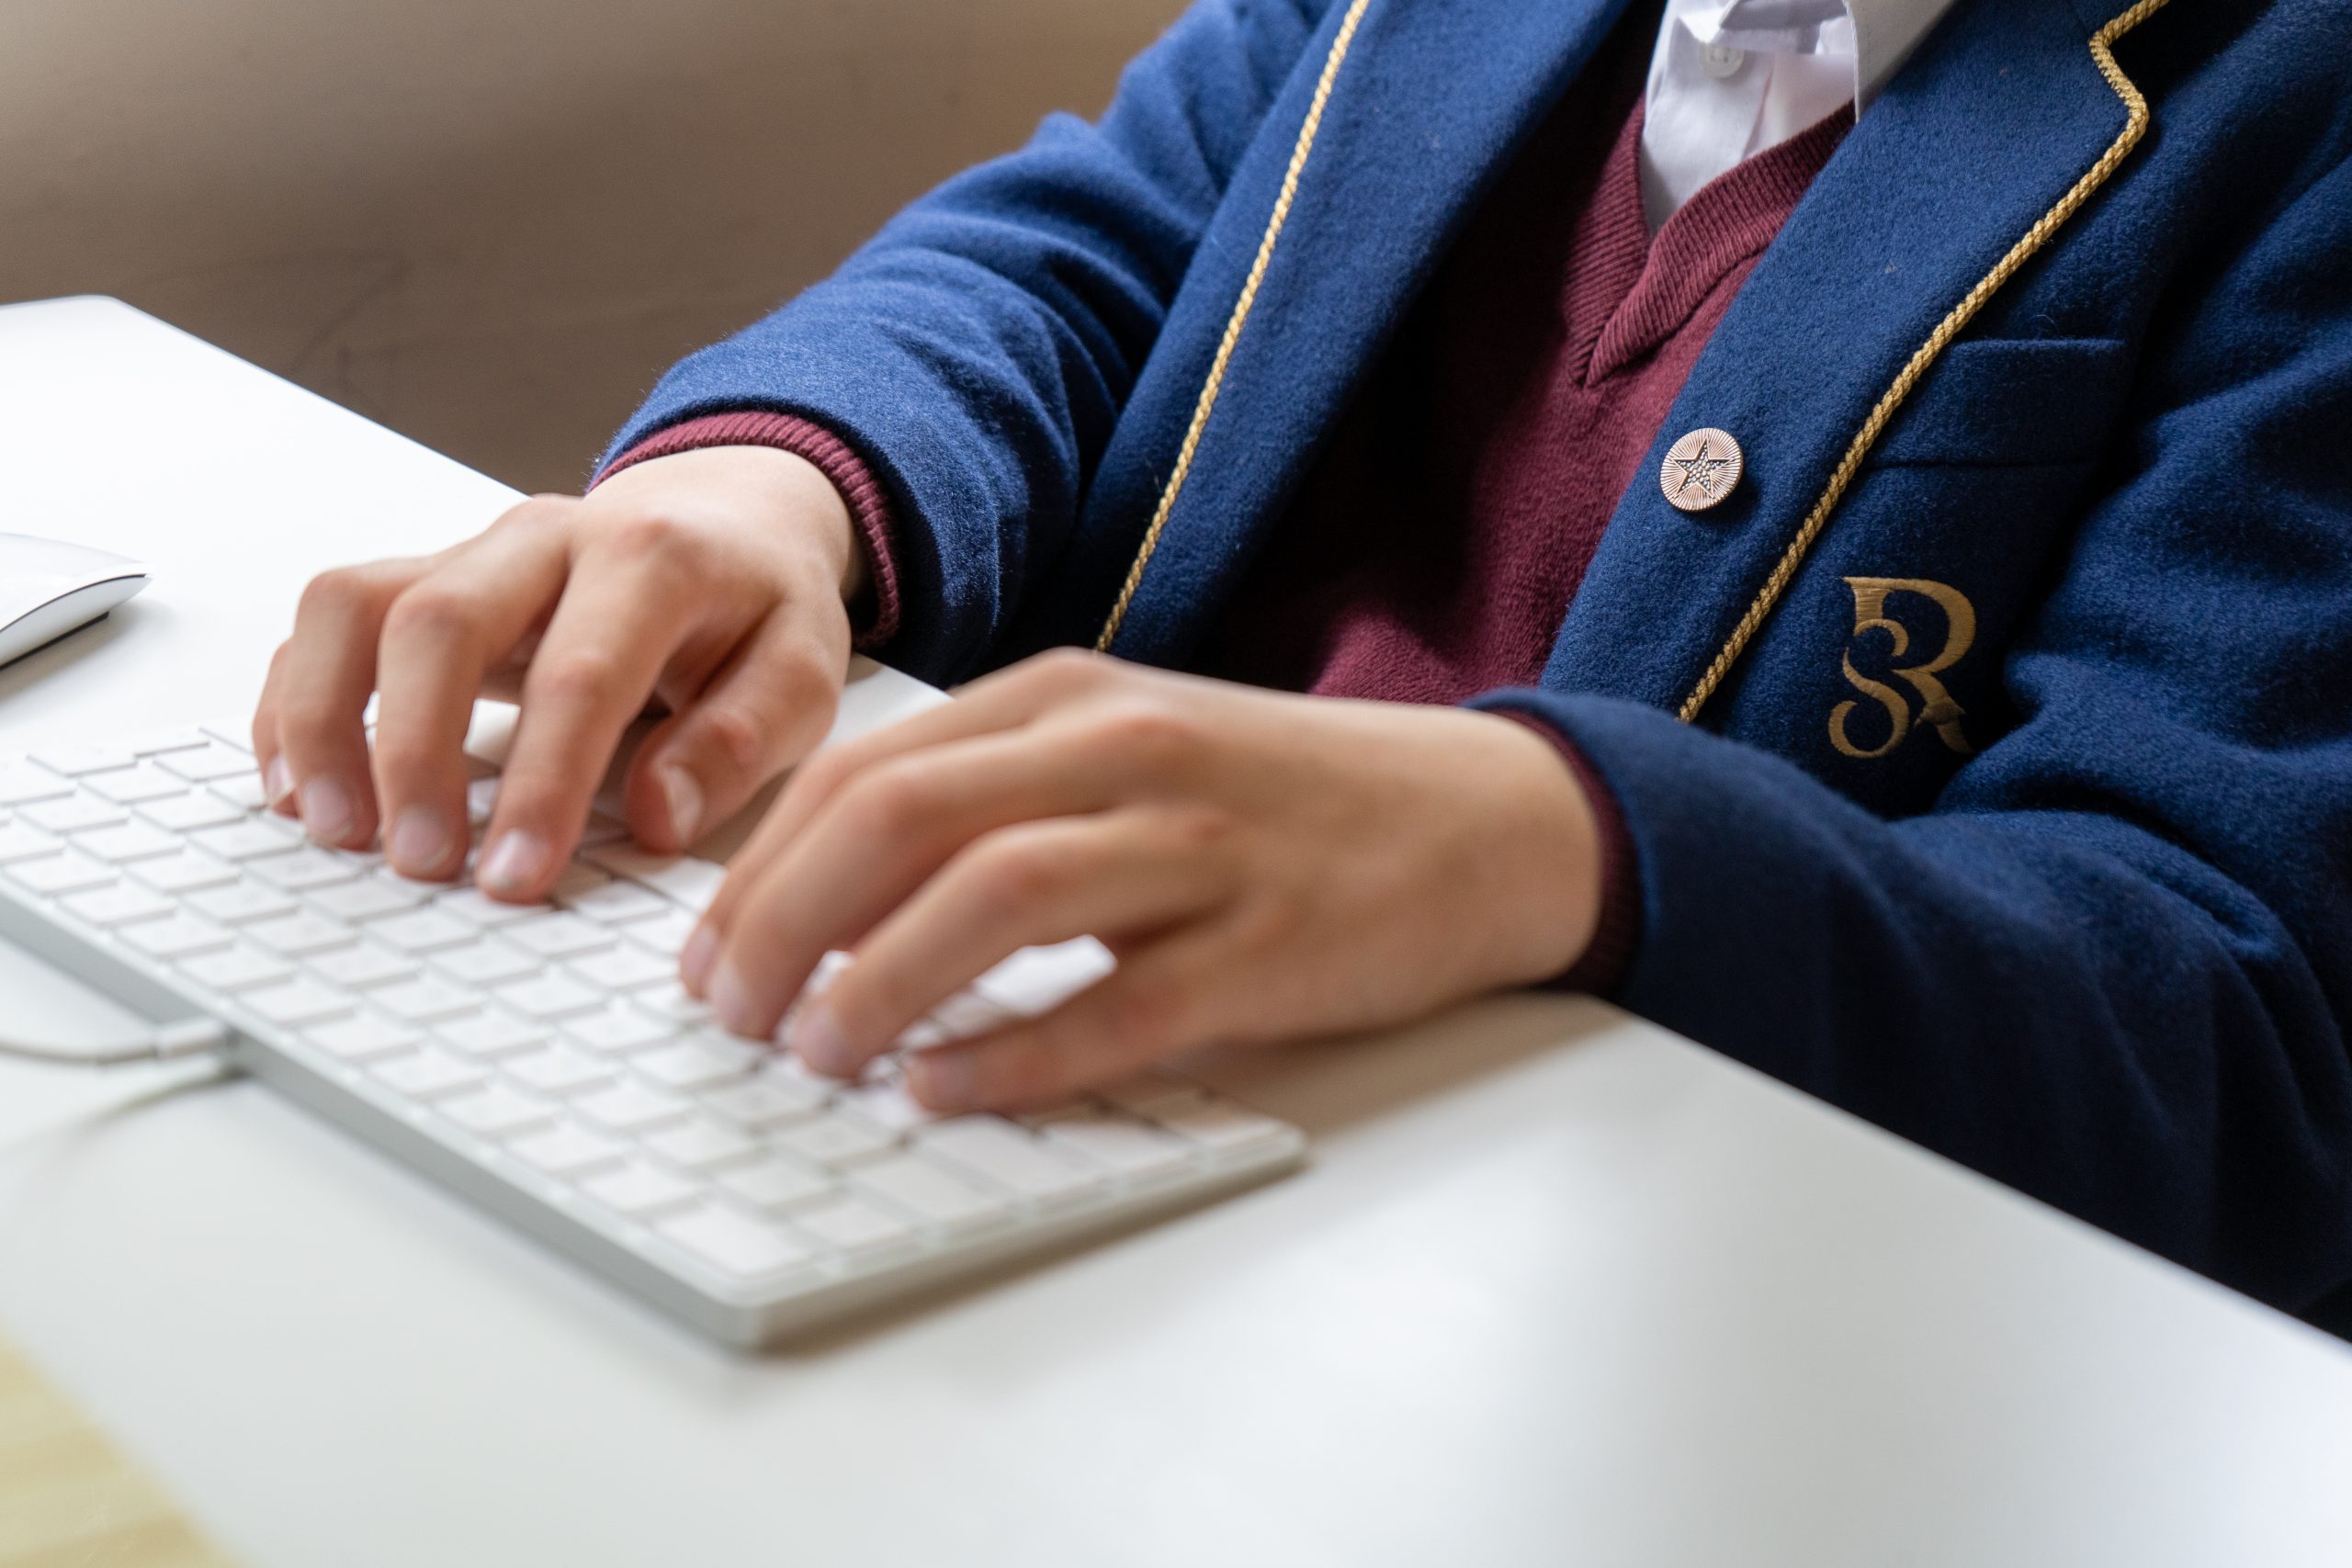 A Rookwood School pupil dressed in uniform typing on a computer keyboard.